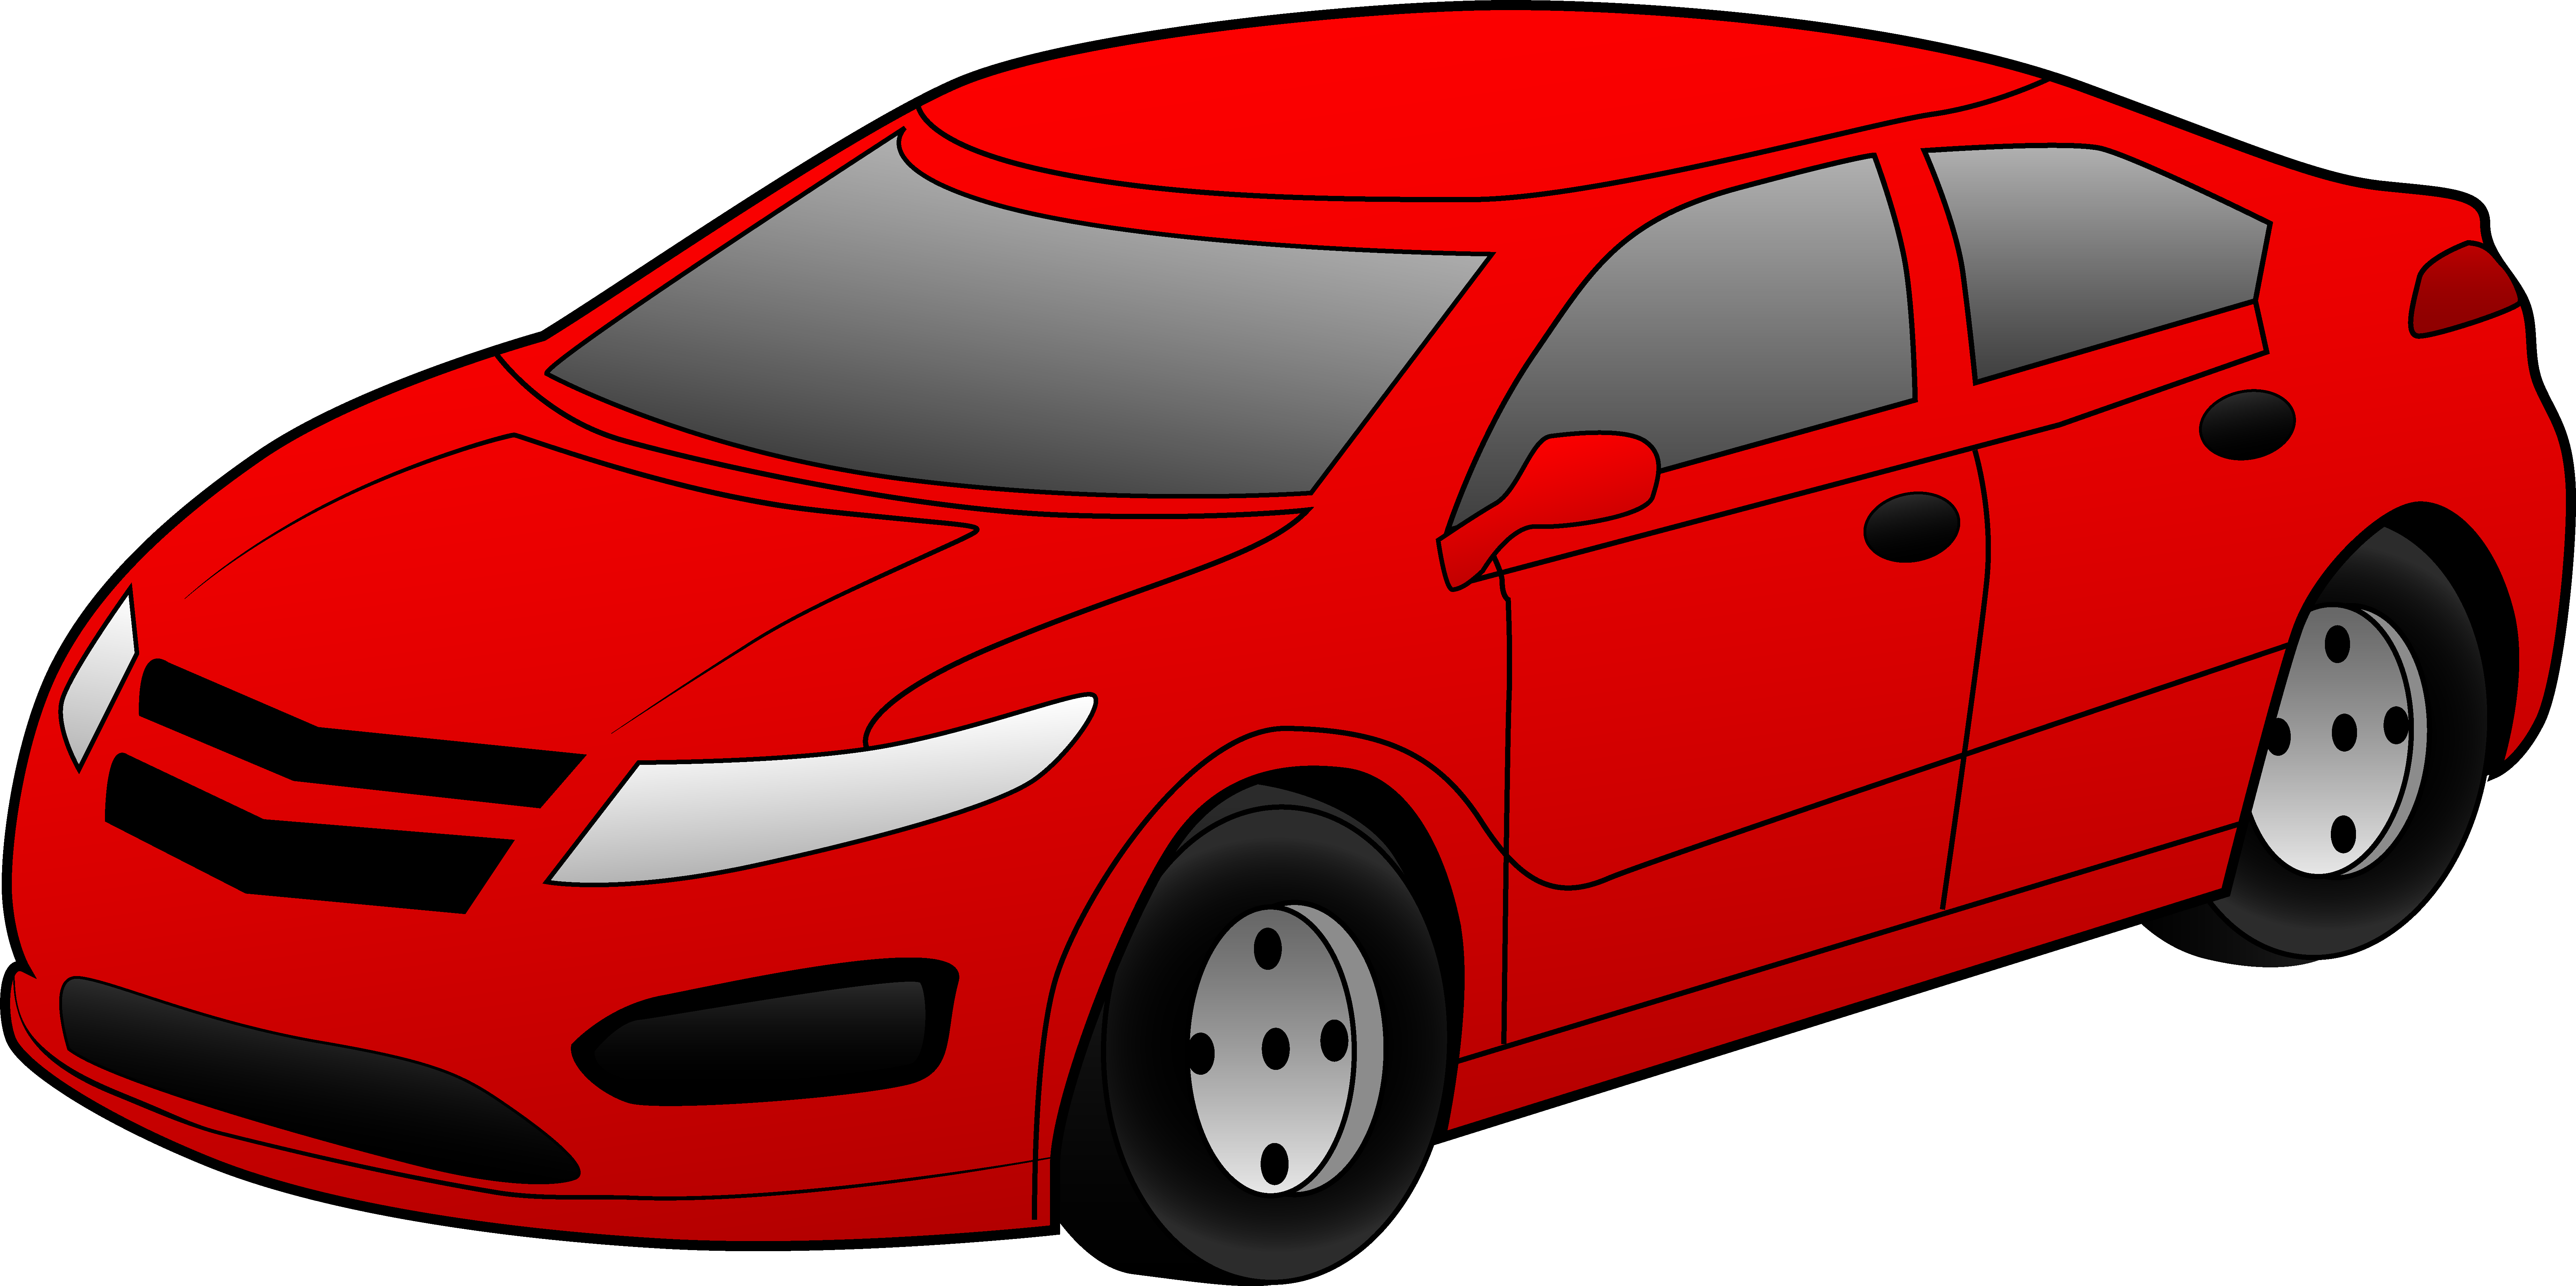 Free Free Car Images, Download Free Clip Art, Free Clip Art